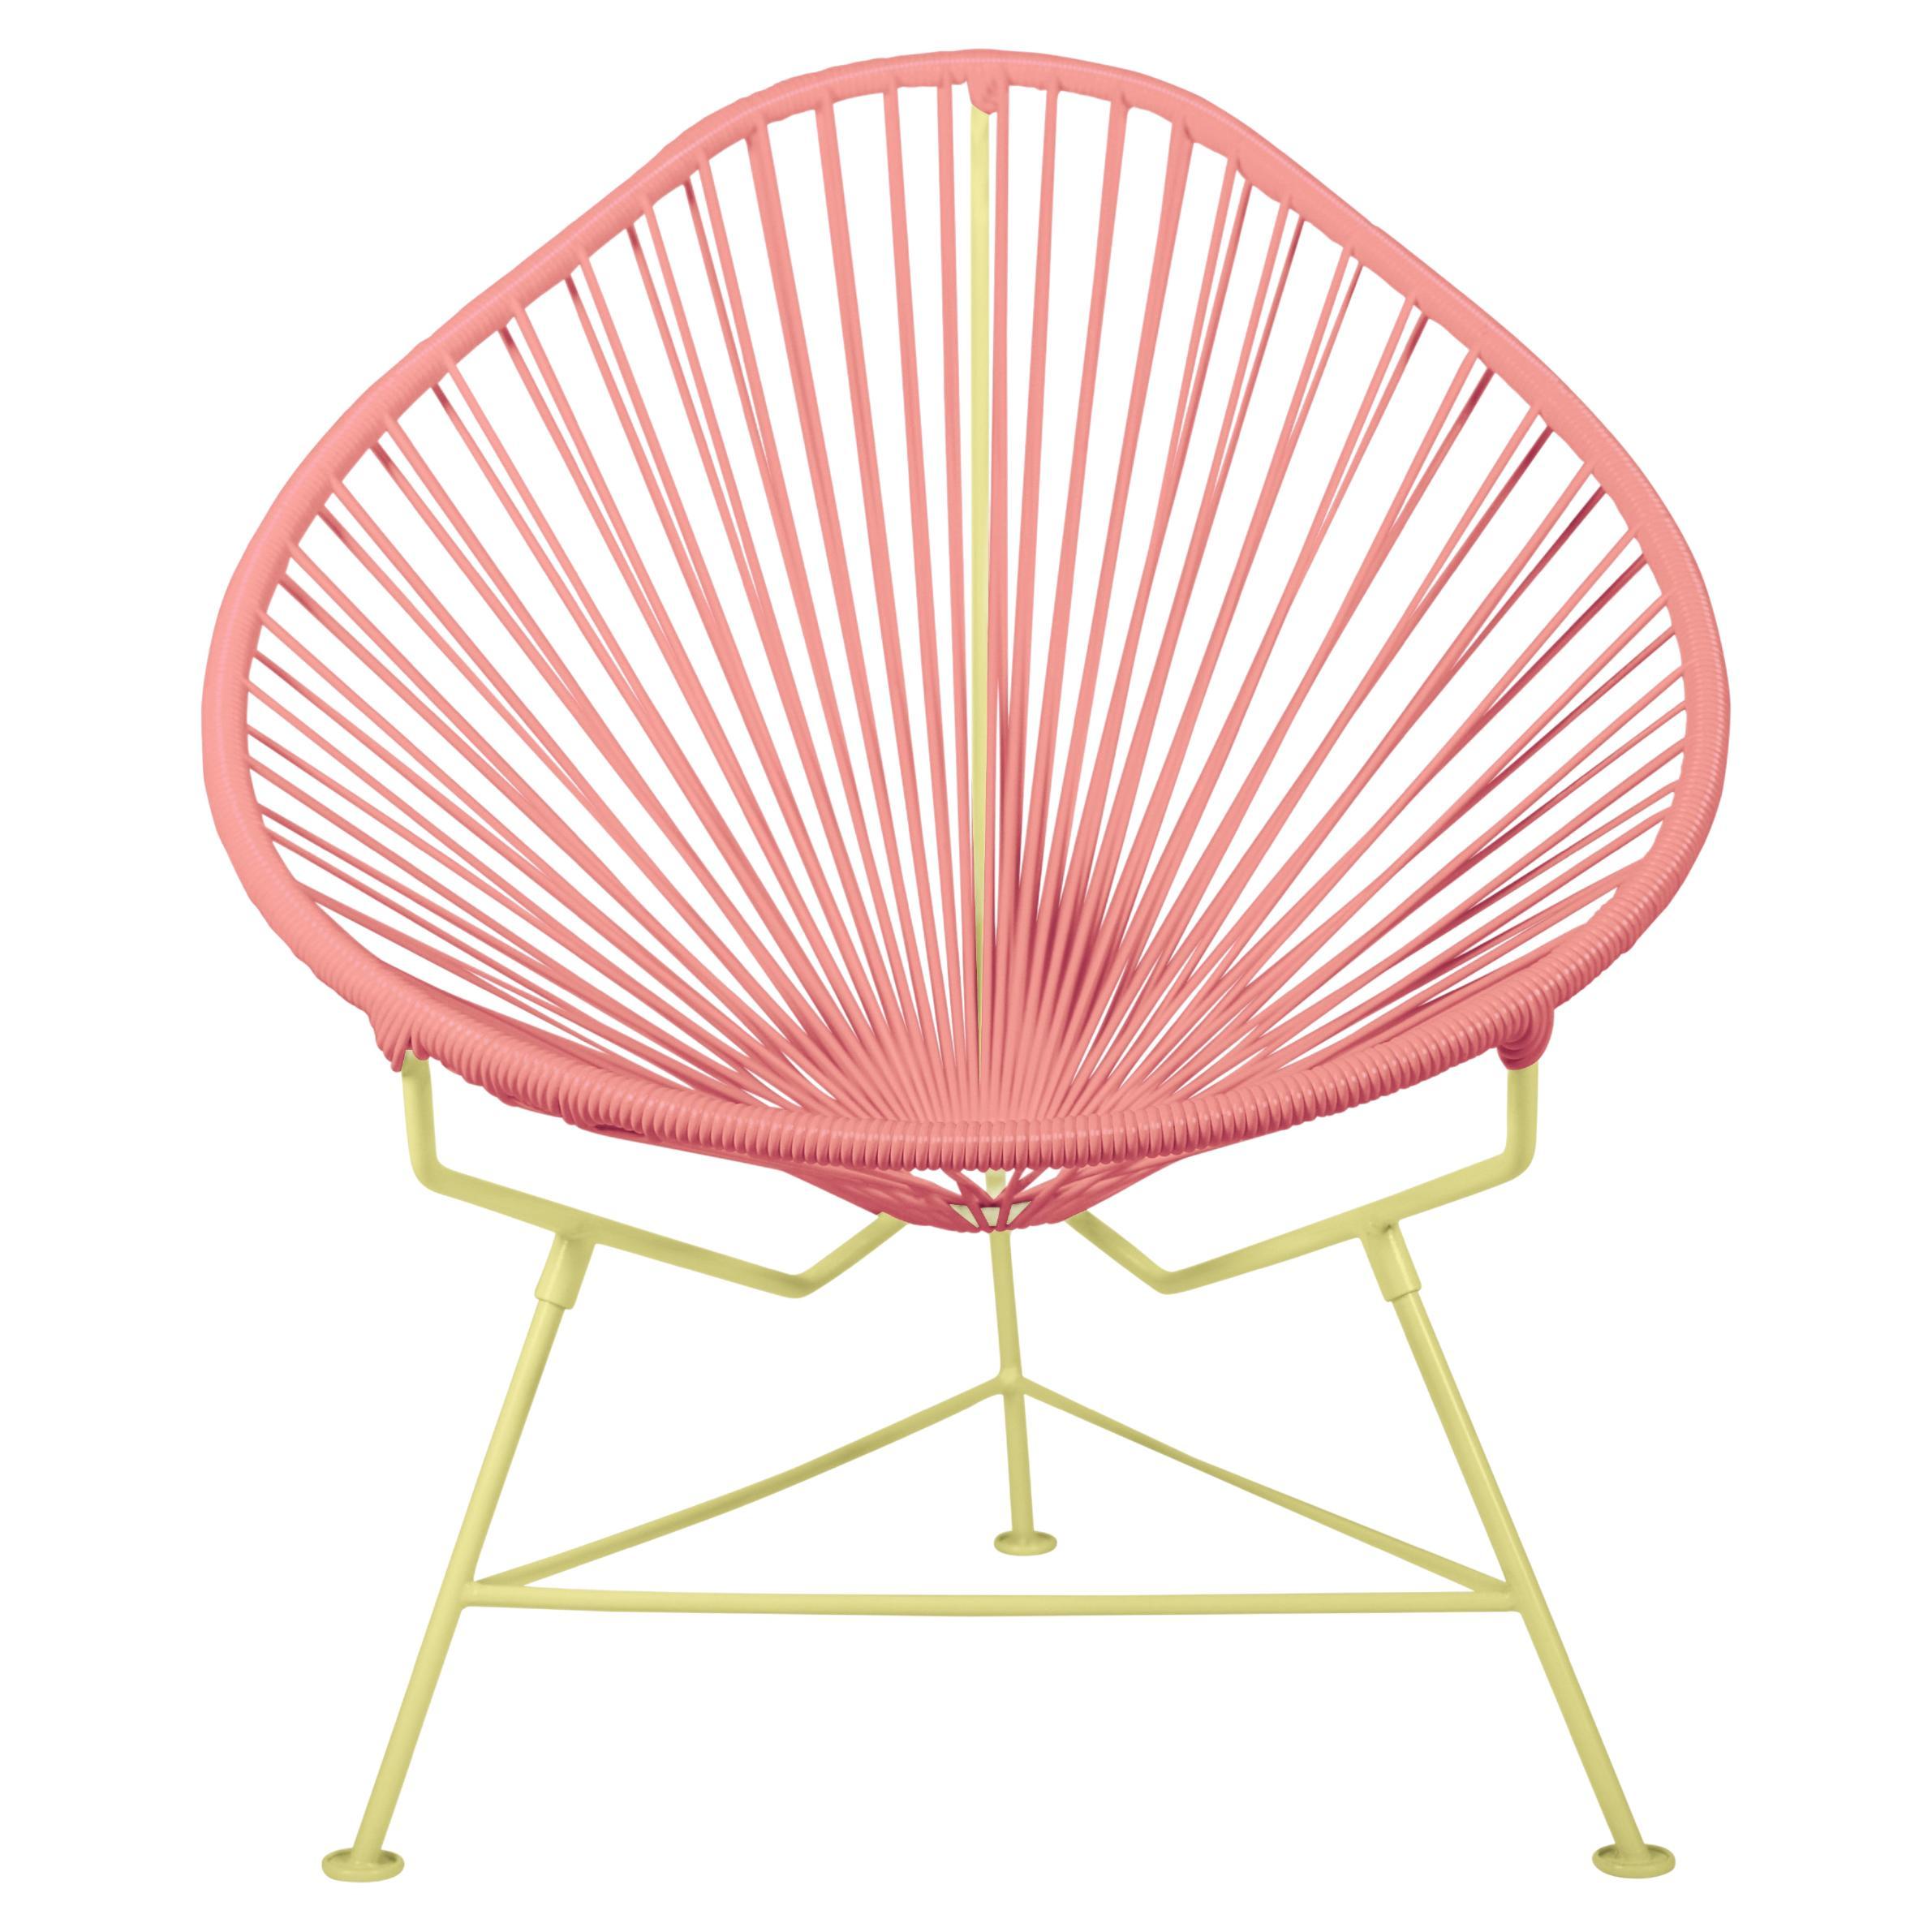 Innit Designs Acapulco Chair Coral Weave on Yellow Frame